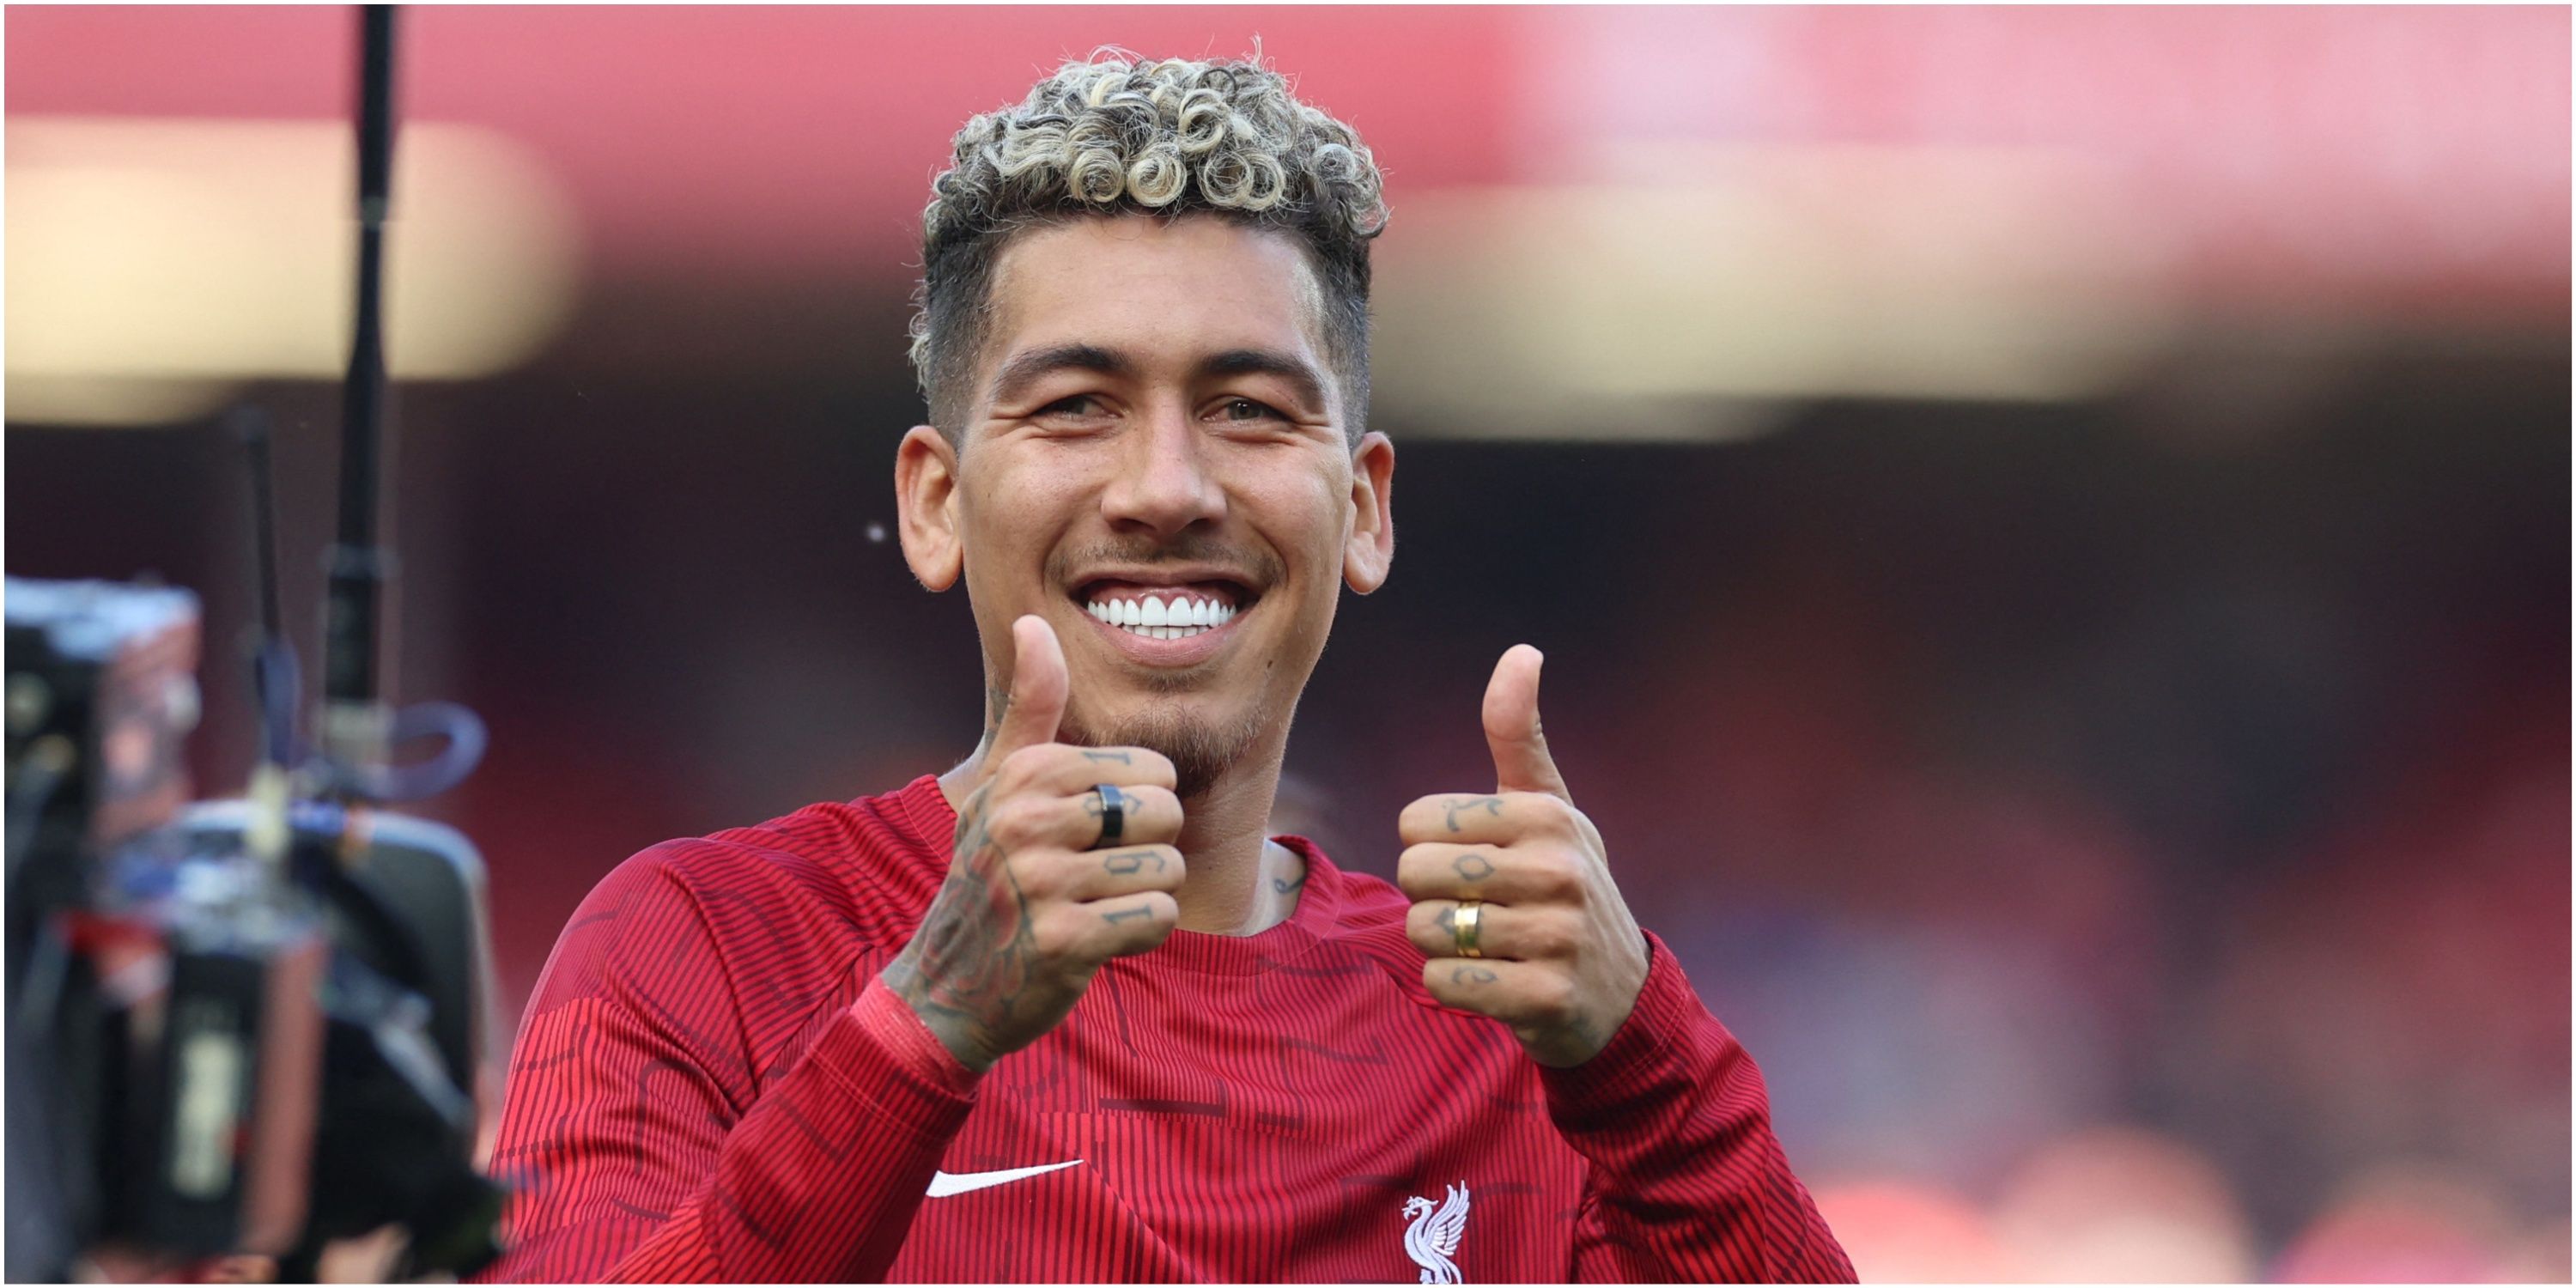 Roberto Firmino gives a thumbs up to the fans on his last appearance for Liverpool at Anfield